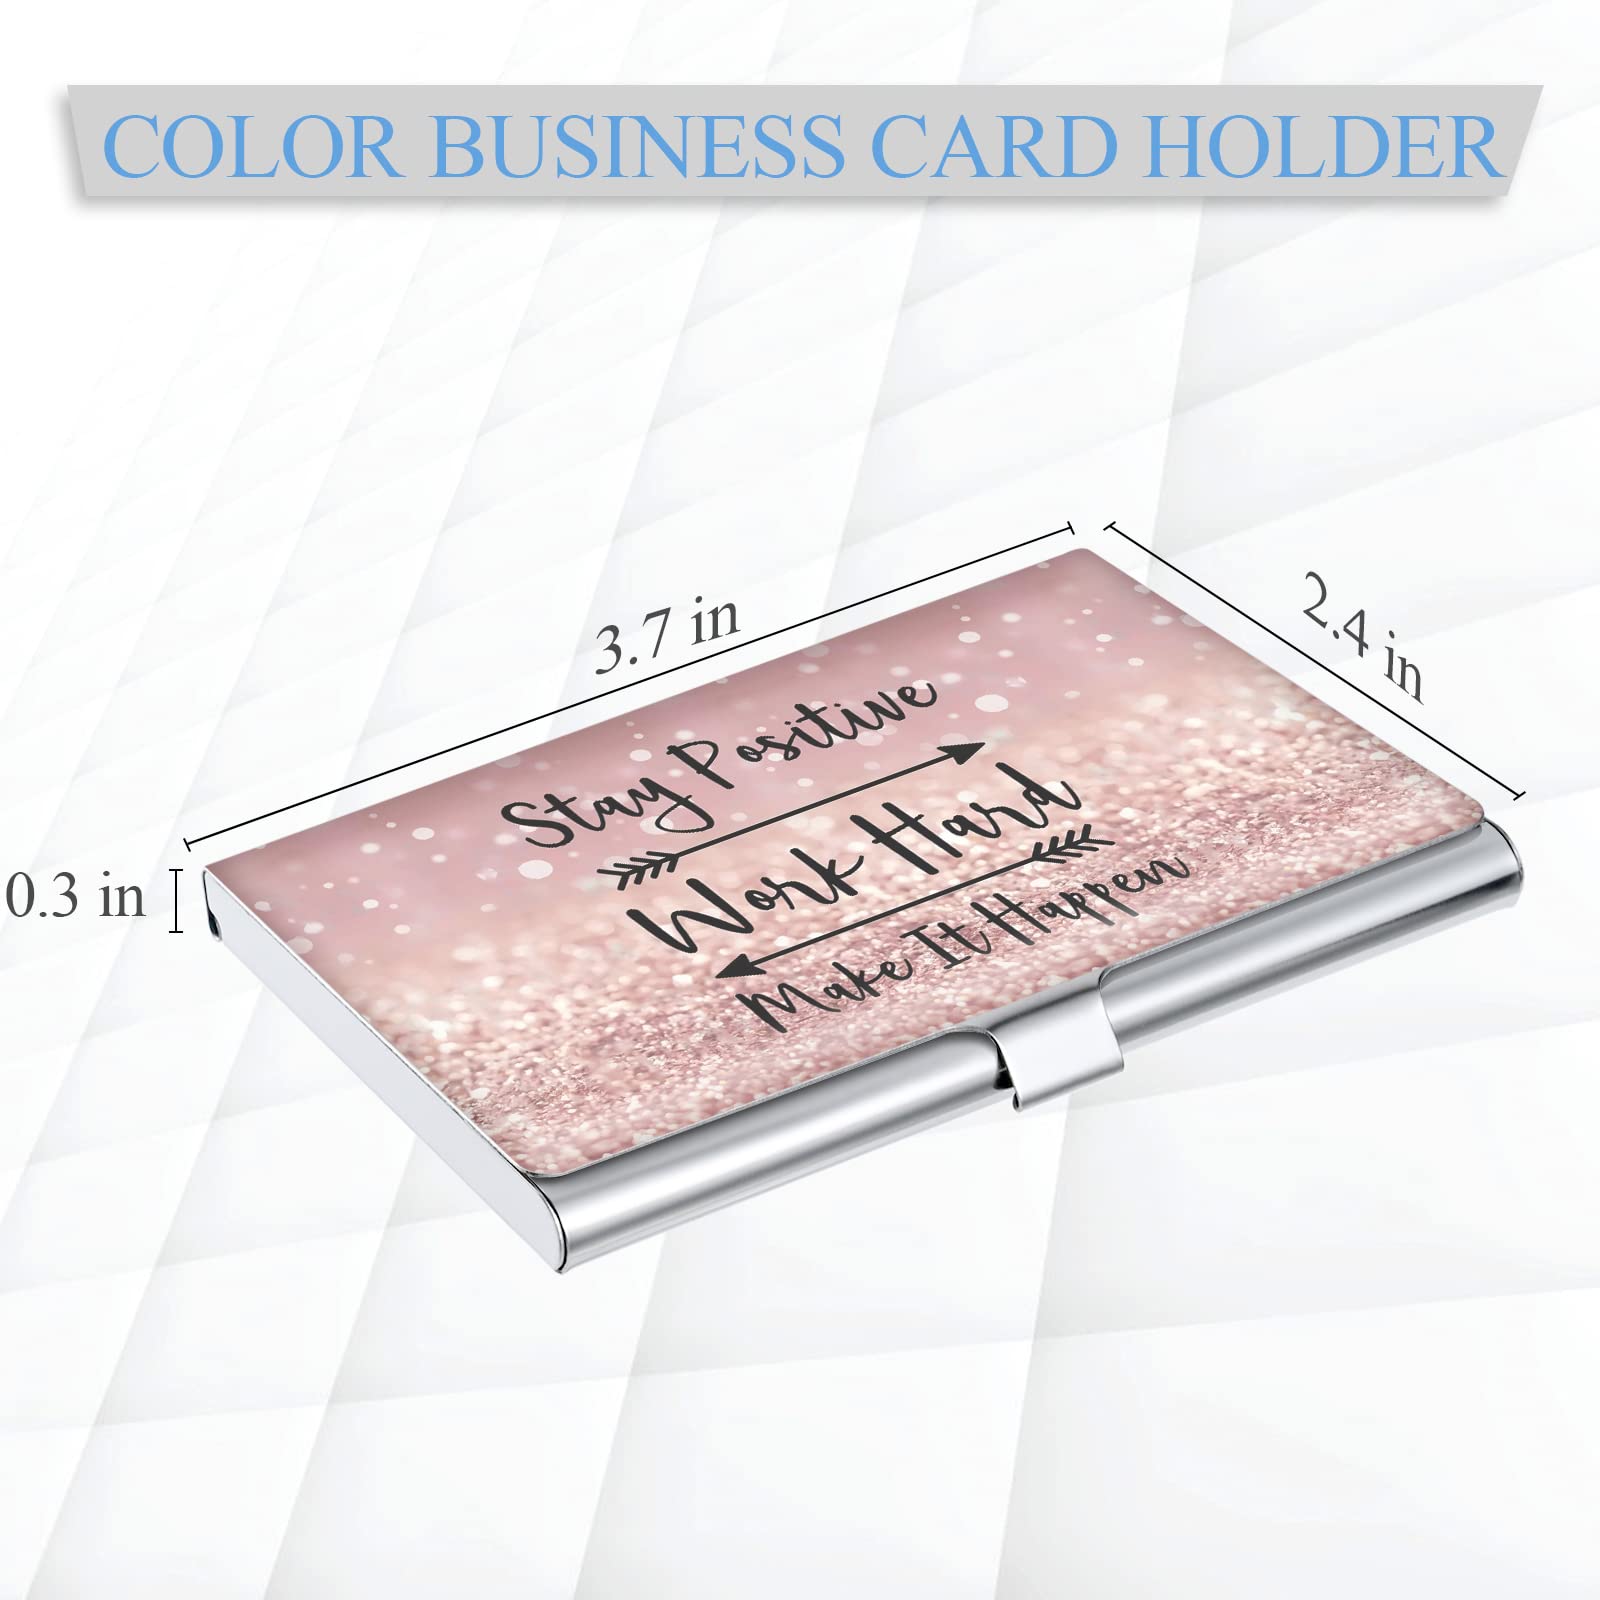 xiviers Business Card Holder，Color Printing Men's and Women's Business Card Case，Ultra-Thin Metal Business Card Organizer，Carry-on Pocket Wallet Business Card Holder,Pink Letters